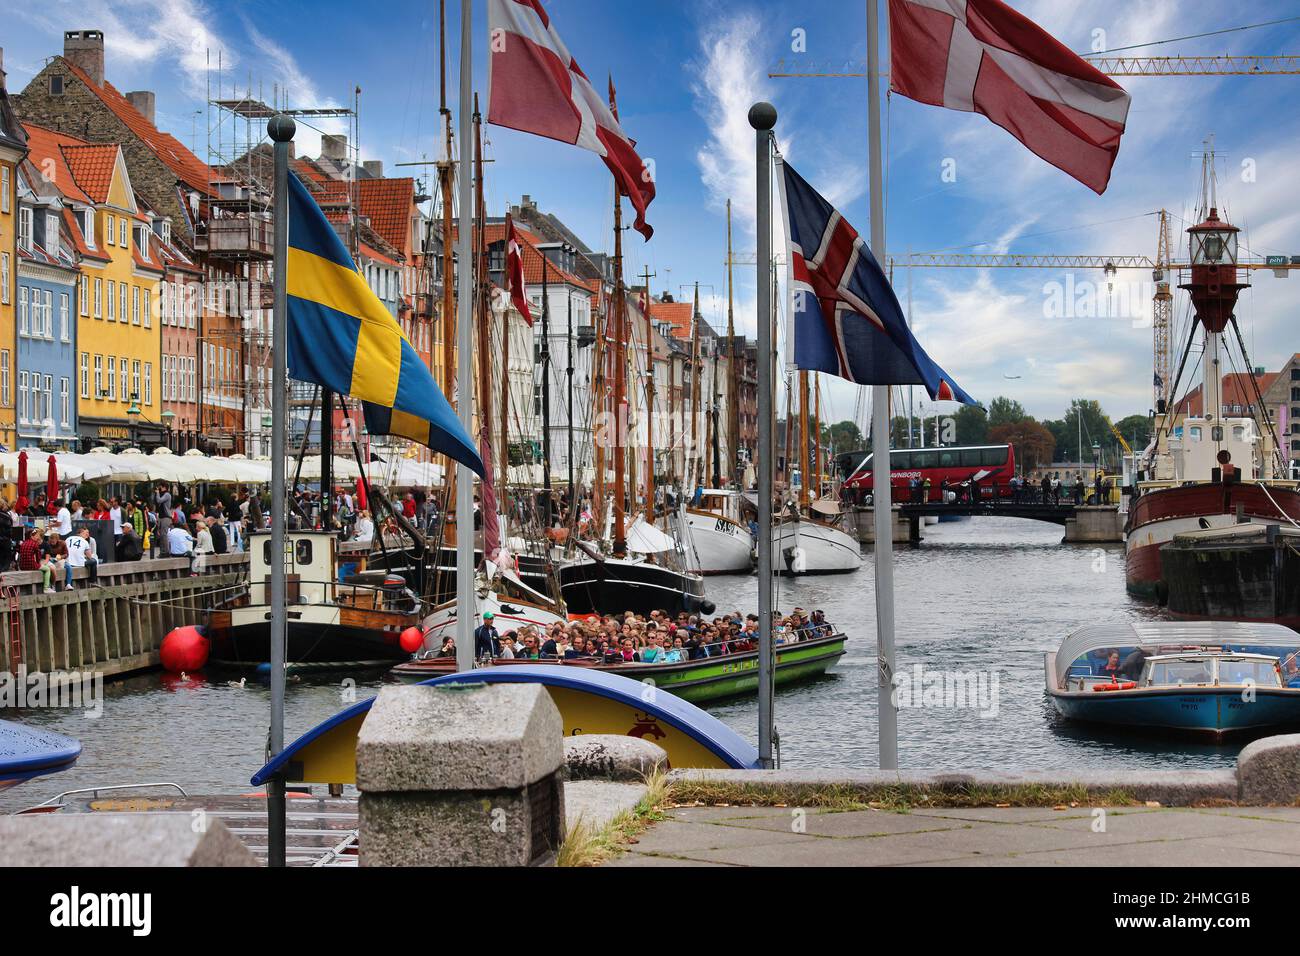 Copenhagen (Nyhavn district) in a sunny summer day Stock Photo